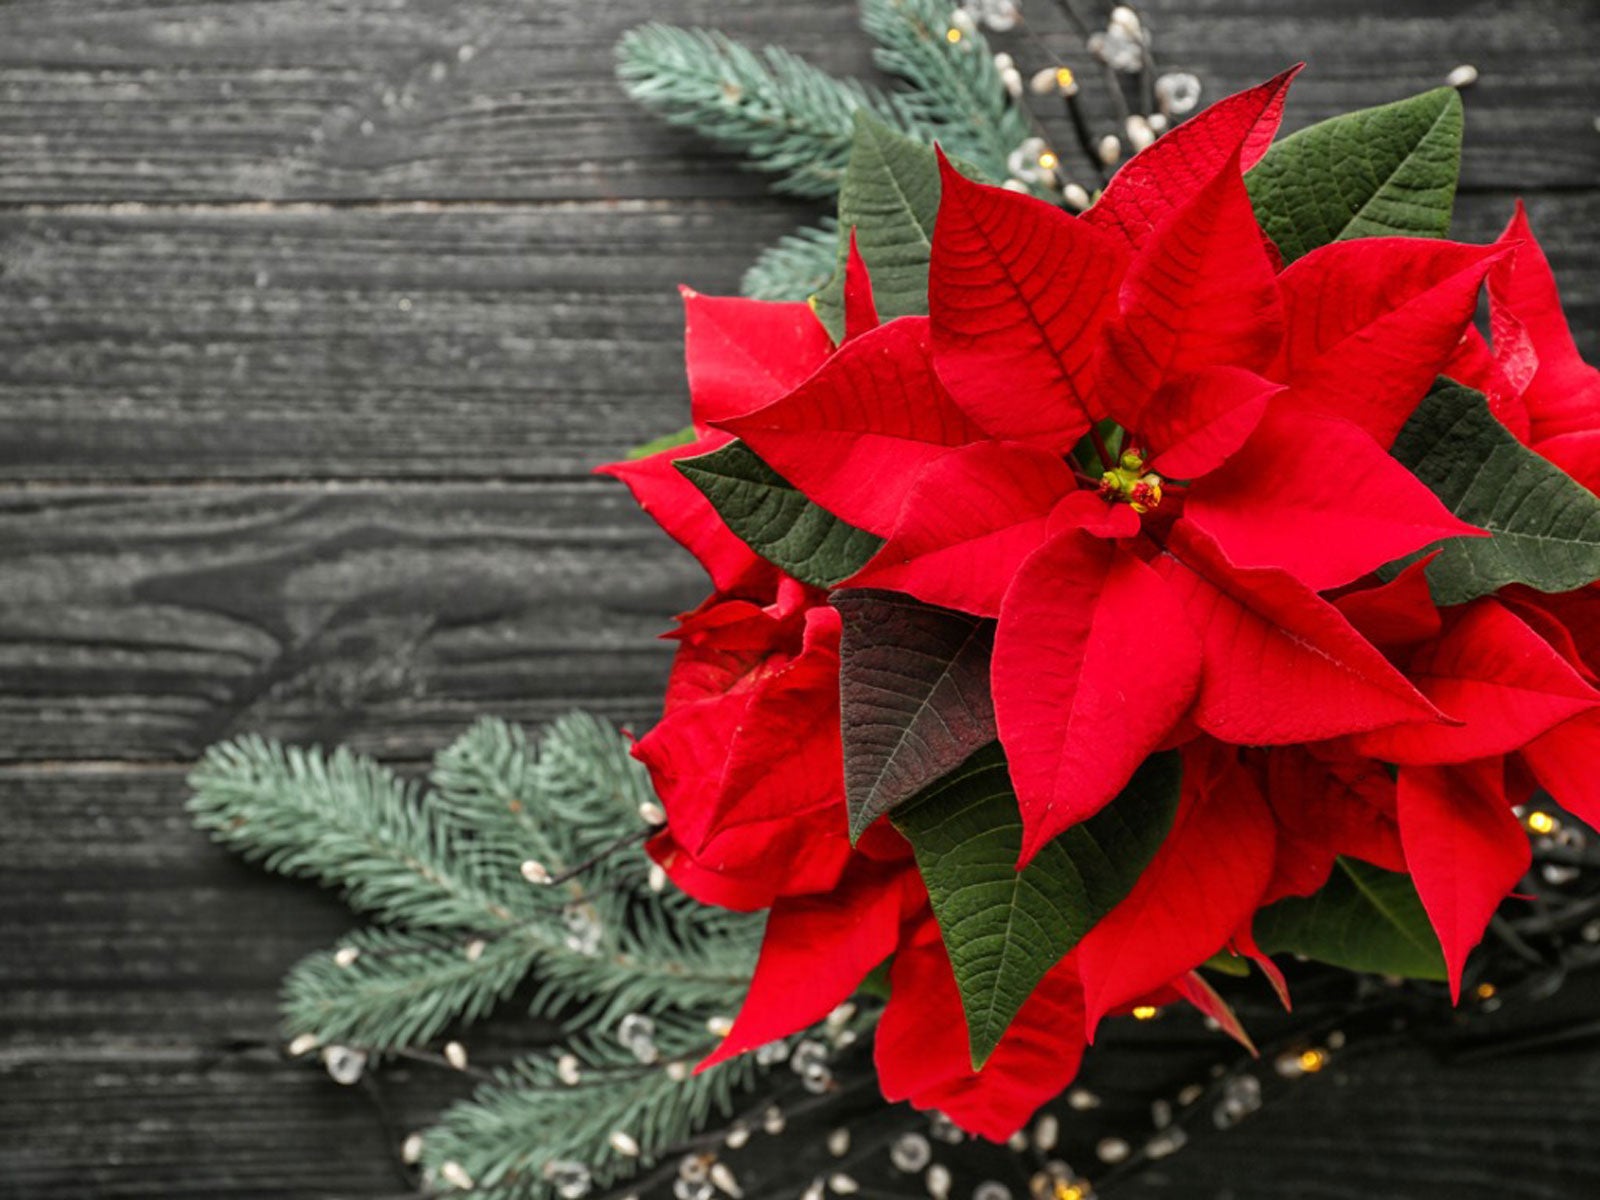 History Behind Christmas Plants How Holiday Plants Became Popular